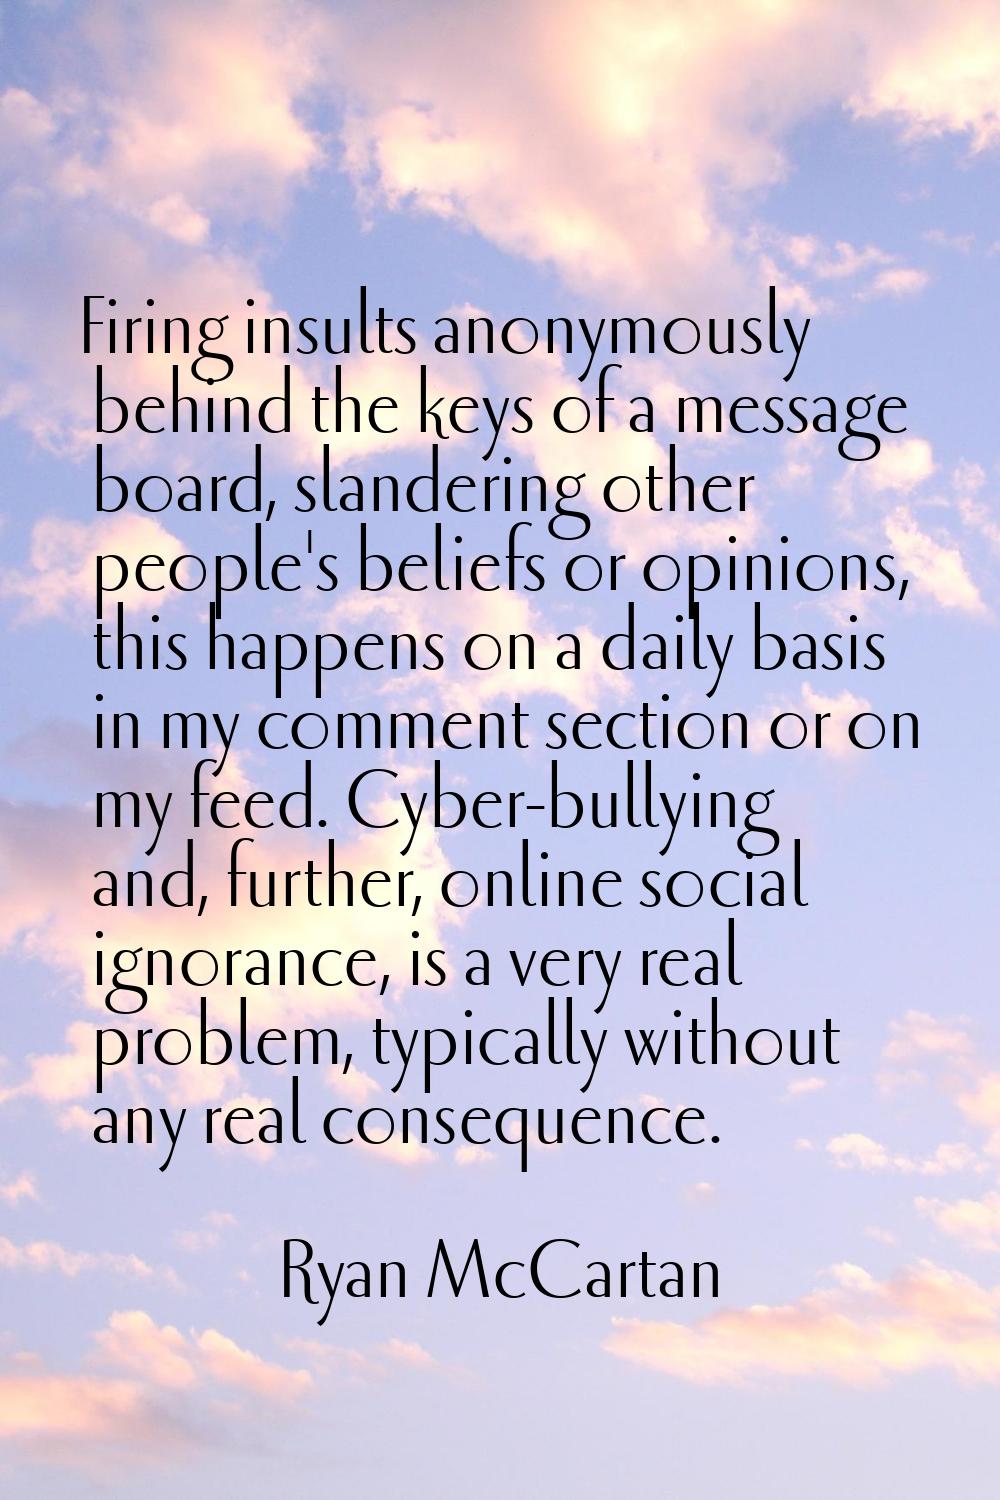 Firing insults anonymously behind the keys of a message board, slandering other people's beliefs or